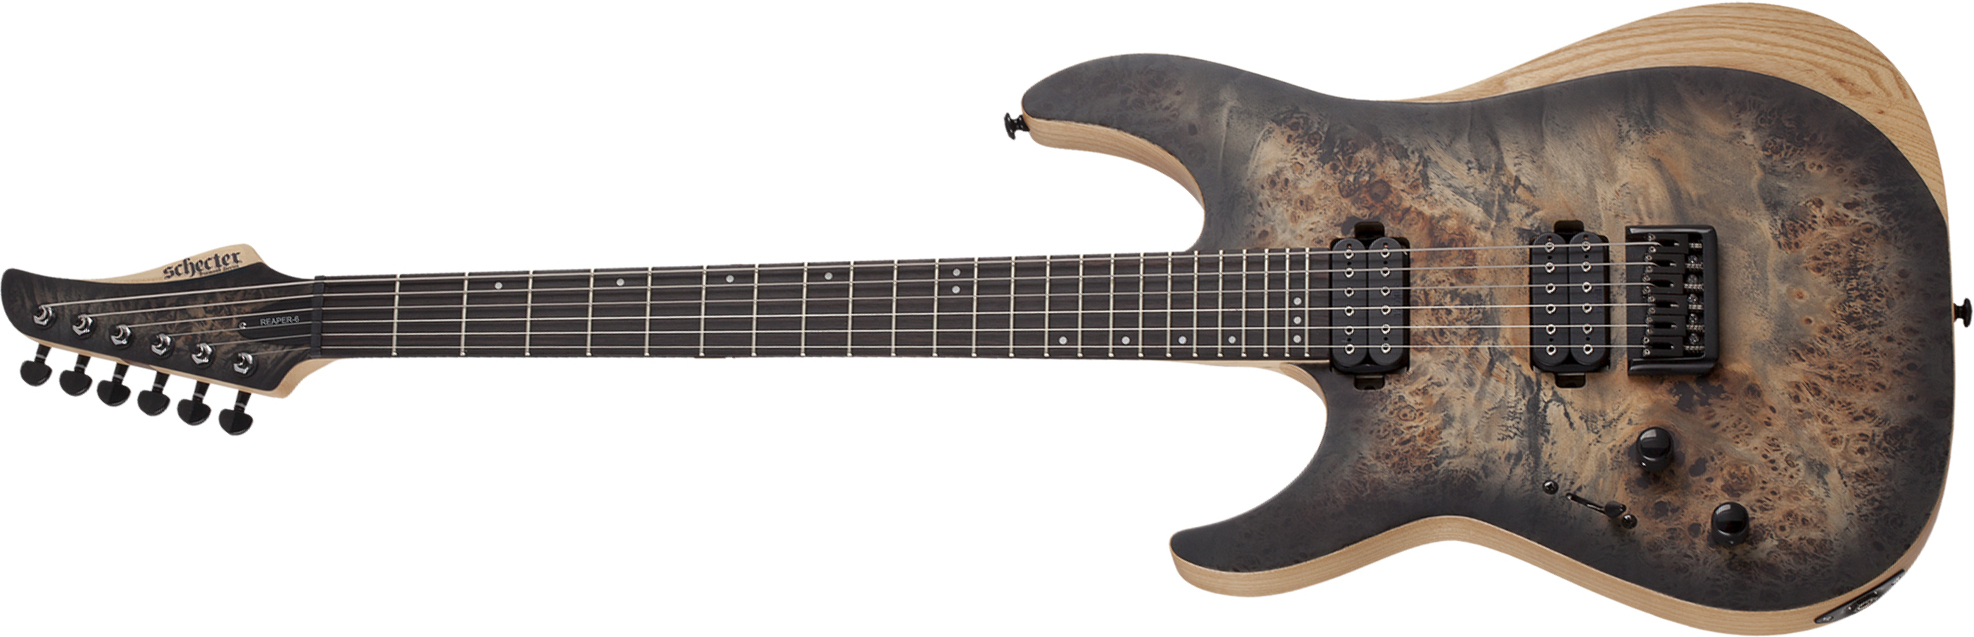 Schecter Reaper-6 Lh Gaucher 2h Ht Eb - Satin Charcoal Burst - Left-handed electric guitar - Main picture